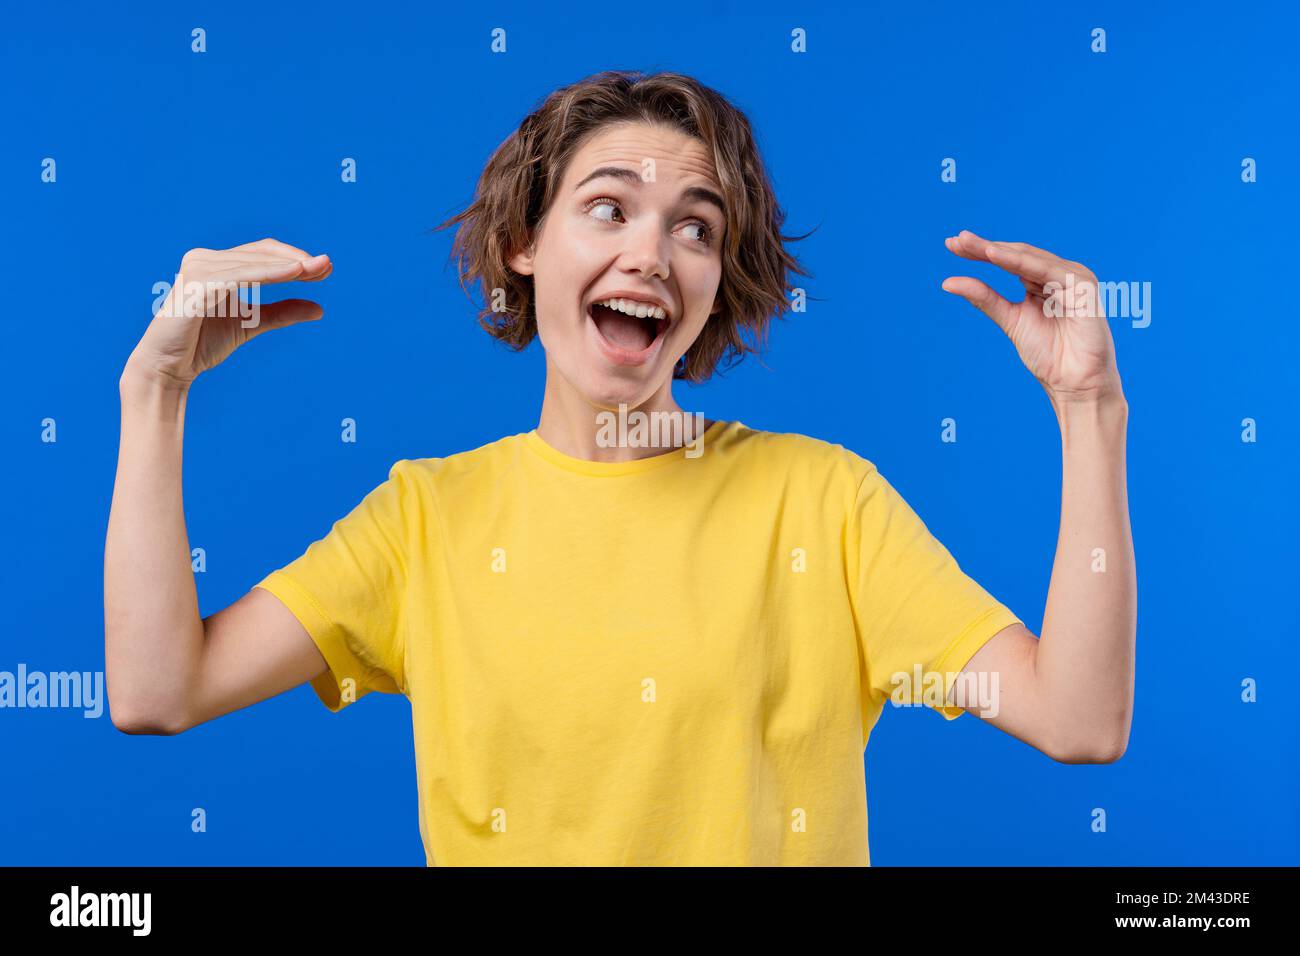 Funny woman showing bla-bla-bla gesture with hands on blue background. Empty promises, irony, blah concept. Lier. Stock Photo